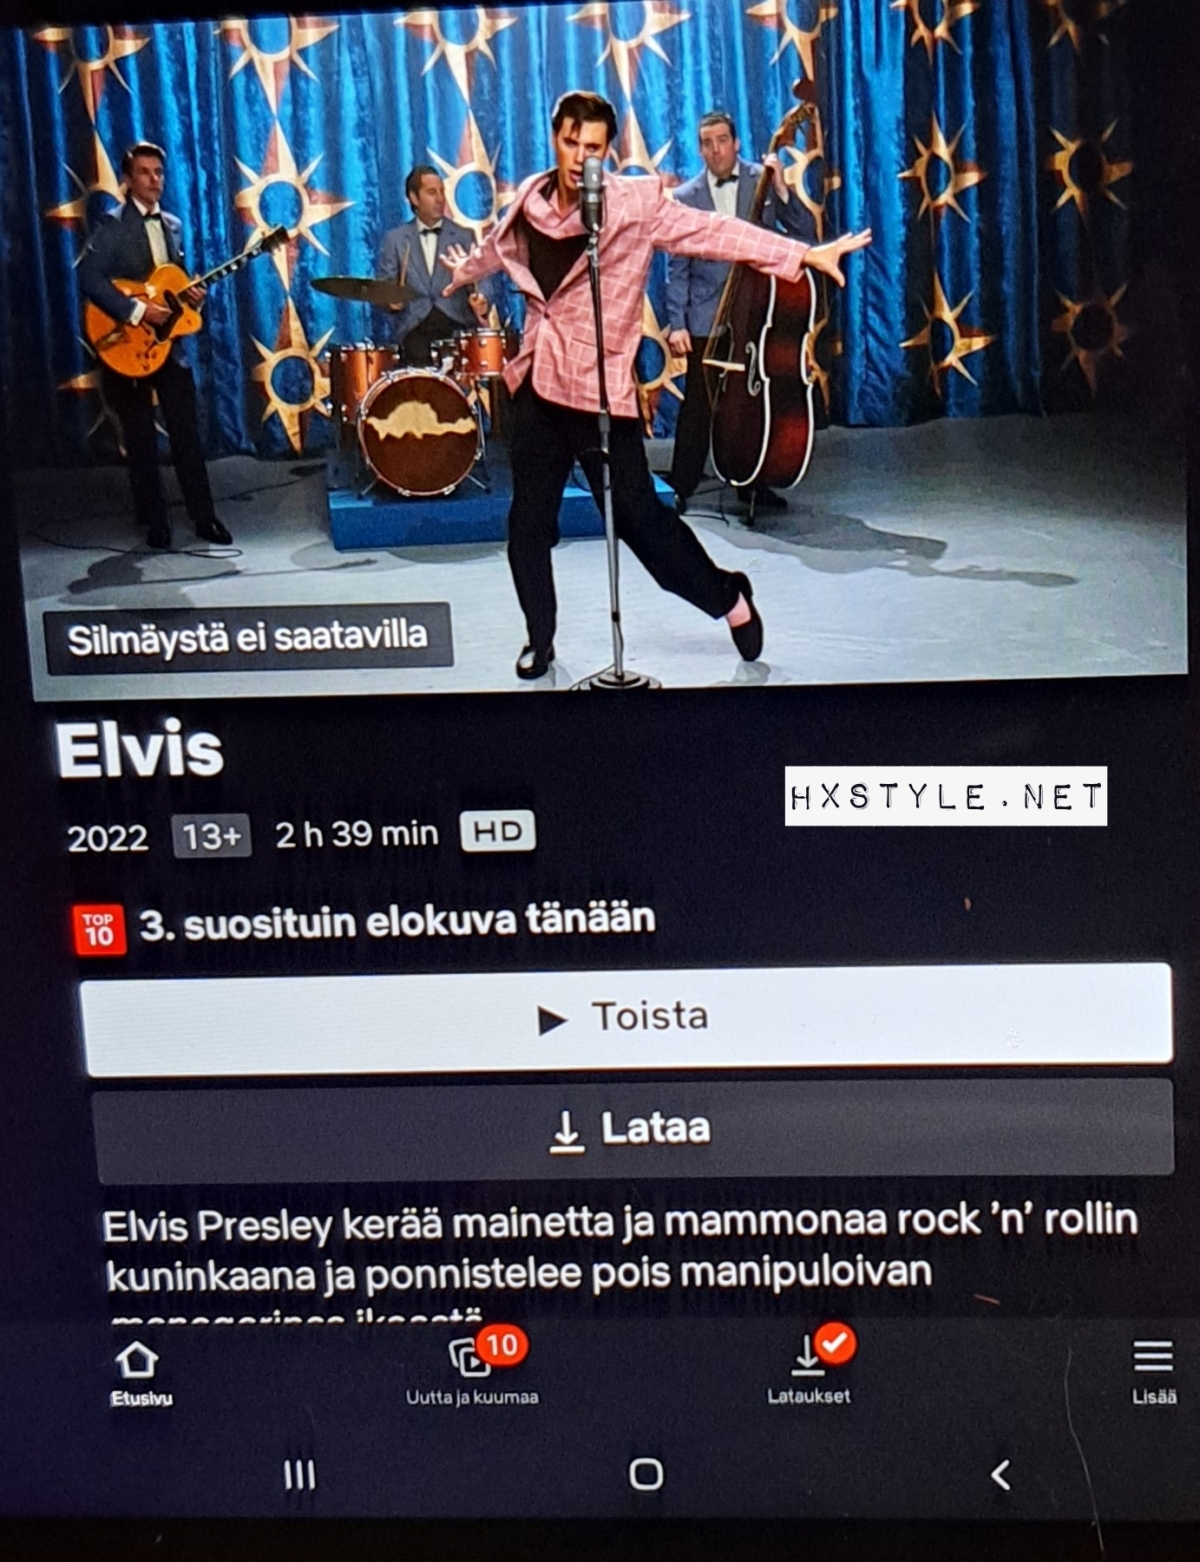 CULTURE/KULTTUURI. MOVIES/ELOKUVAT…New Interview….ELVIS Movie PREMIERE 29.6.2022. NETFLIX….Drama and Classic&KING of Rockn Roll MUSIC Elvis Presley 1935 – 1977. ALBUMS, Singles/Hits, Music videos and Movies. My old Favourite, Classic Singer&Actor STAR.  21 – 22.1.2024. FAVOURITE 68…34+34 Likes. …LIFESTYLEBLOG HXSTYLE.net Heini